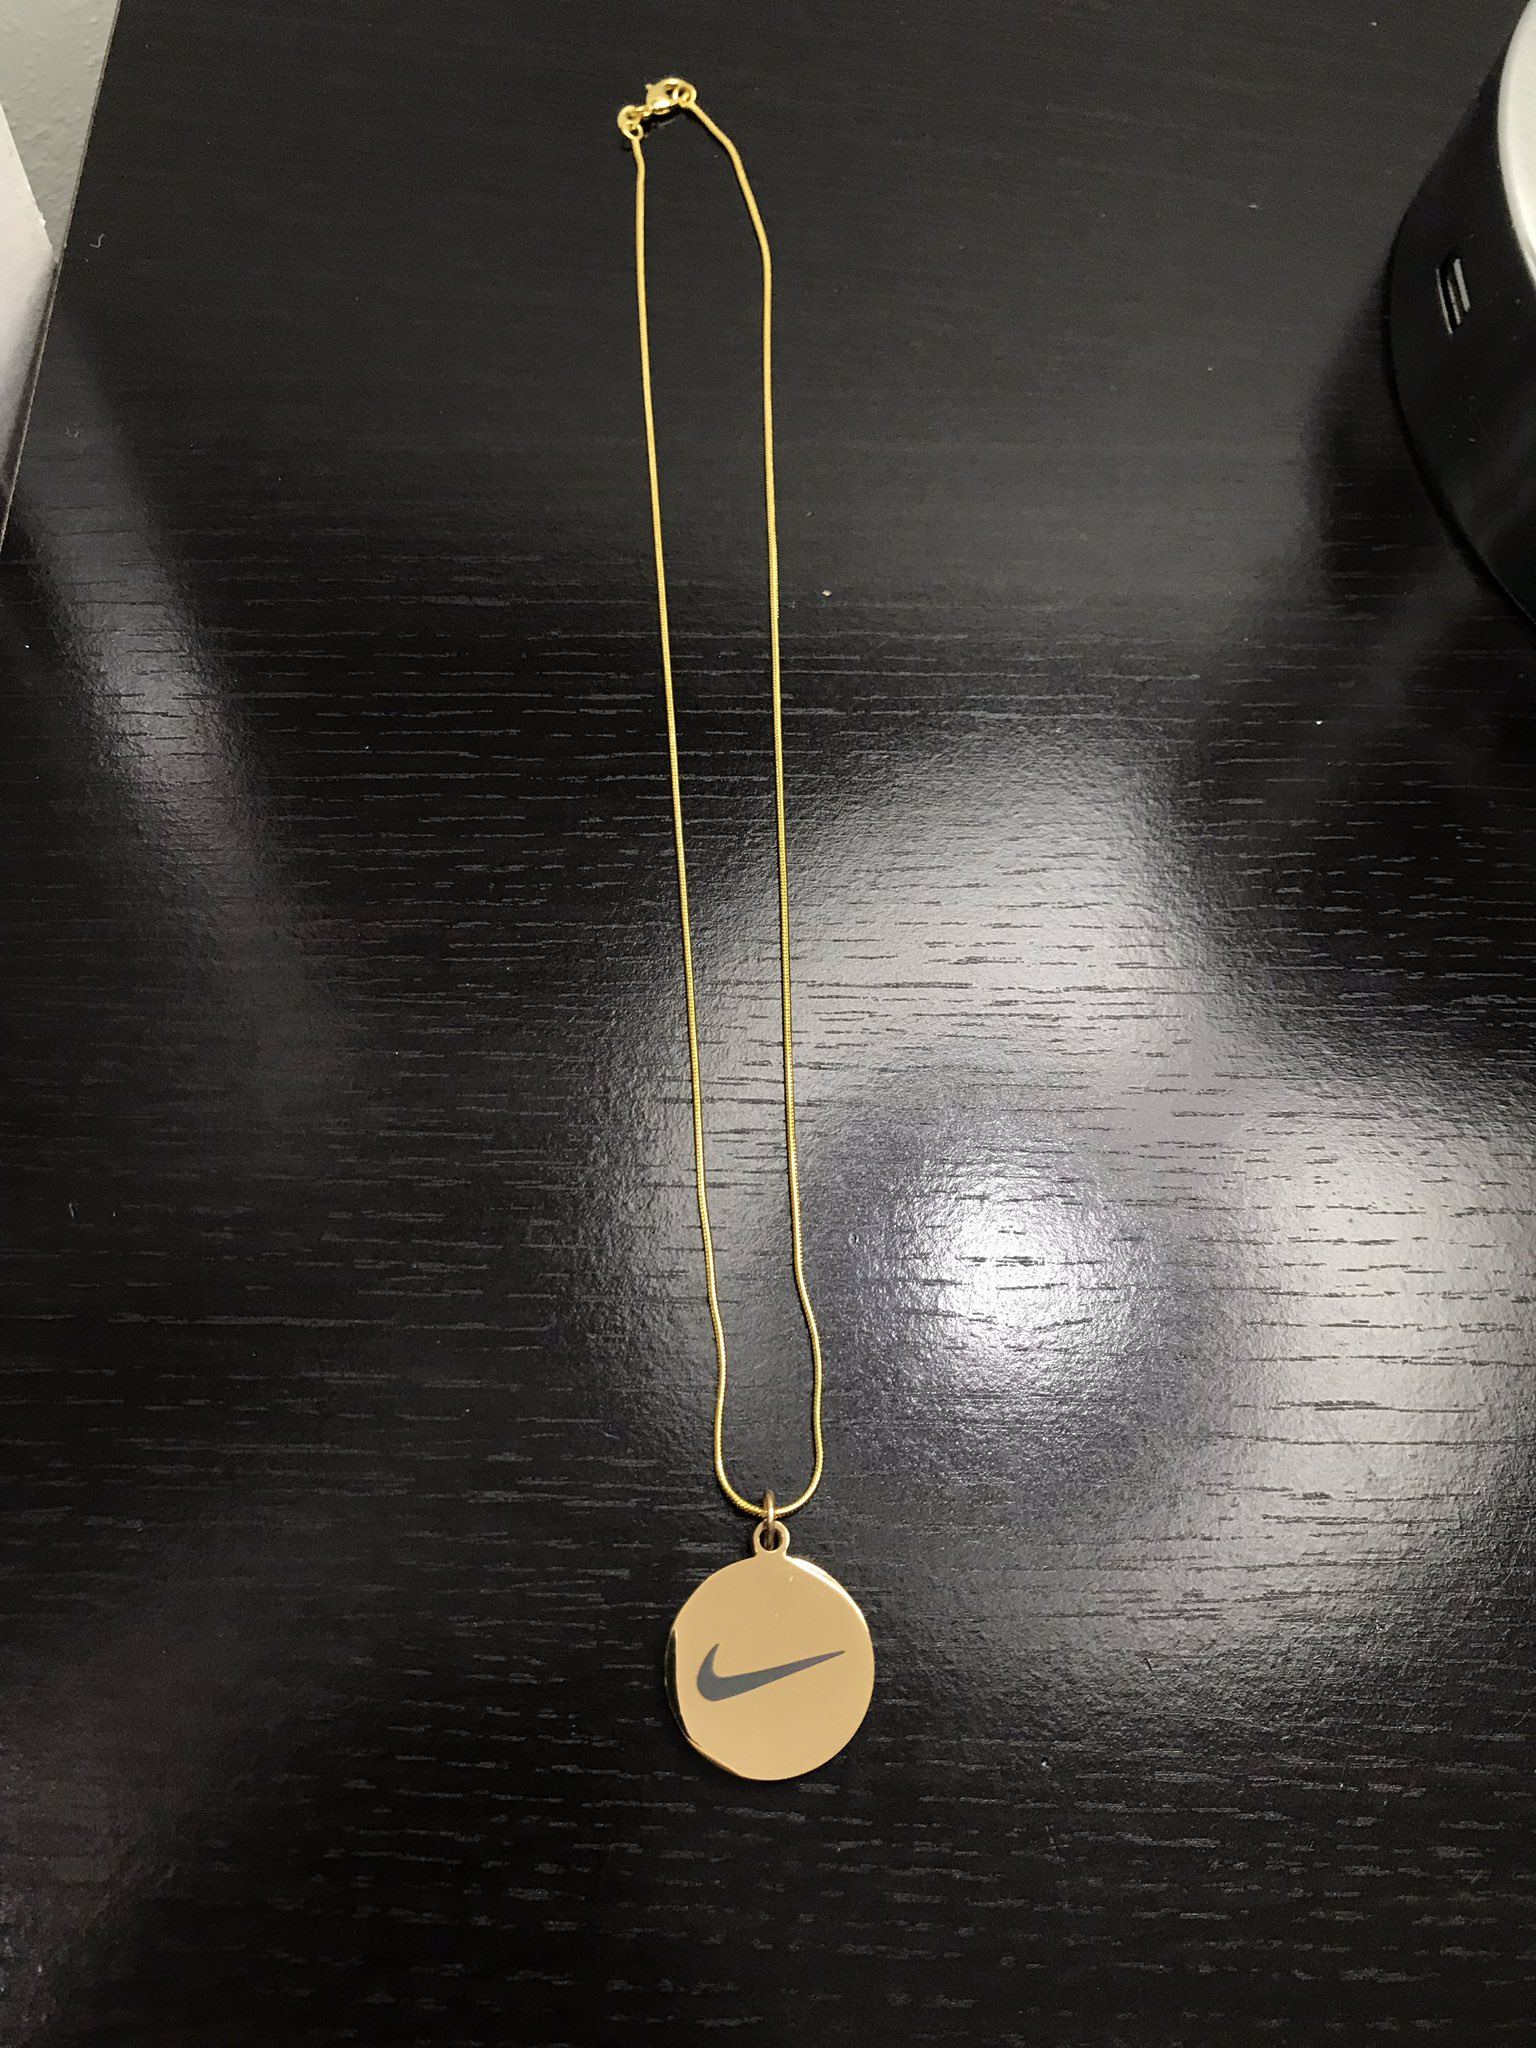 Nike Chain Necklaces